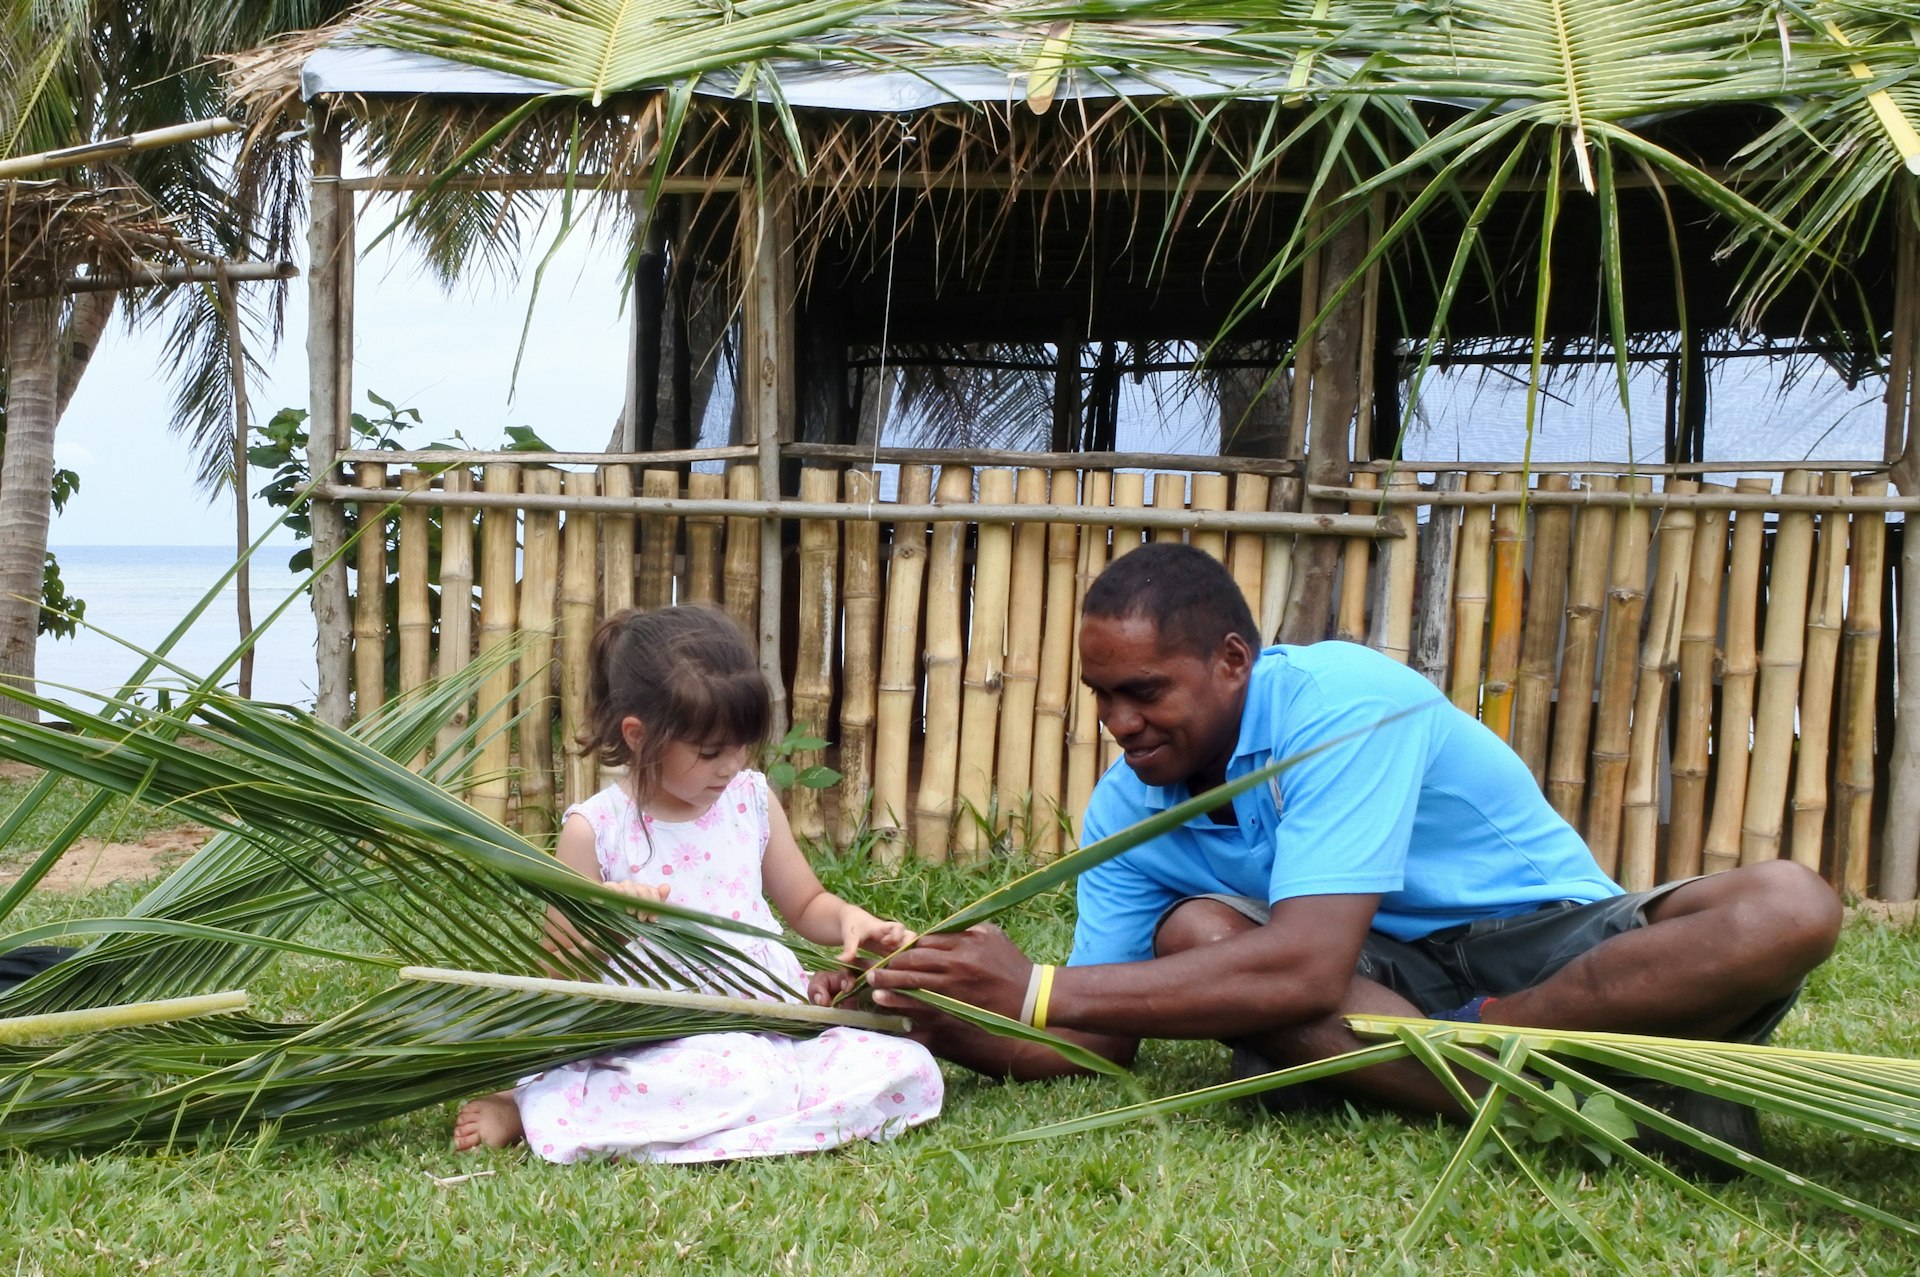 A Fijian man shows a young tourist girl how to create a basket from weaving together palm fronds